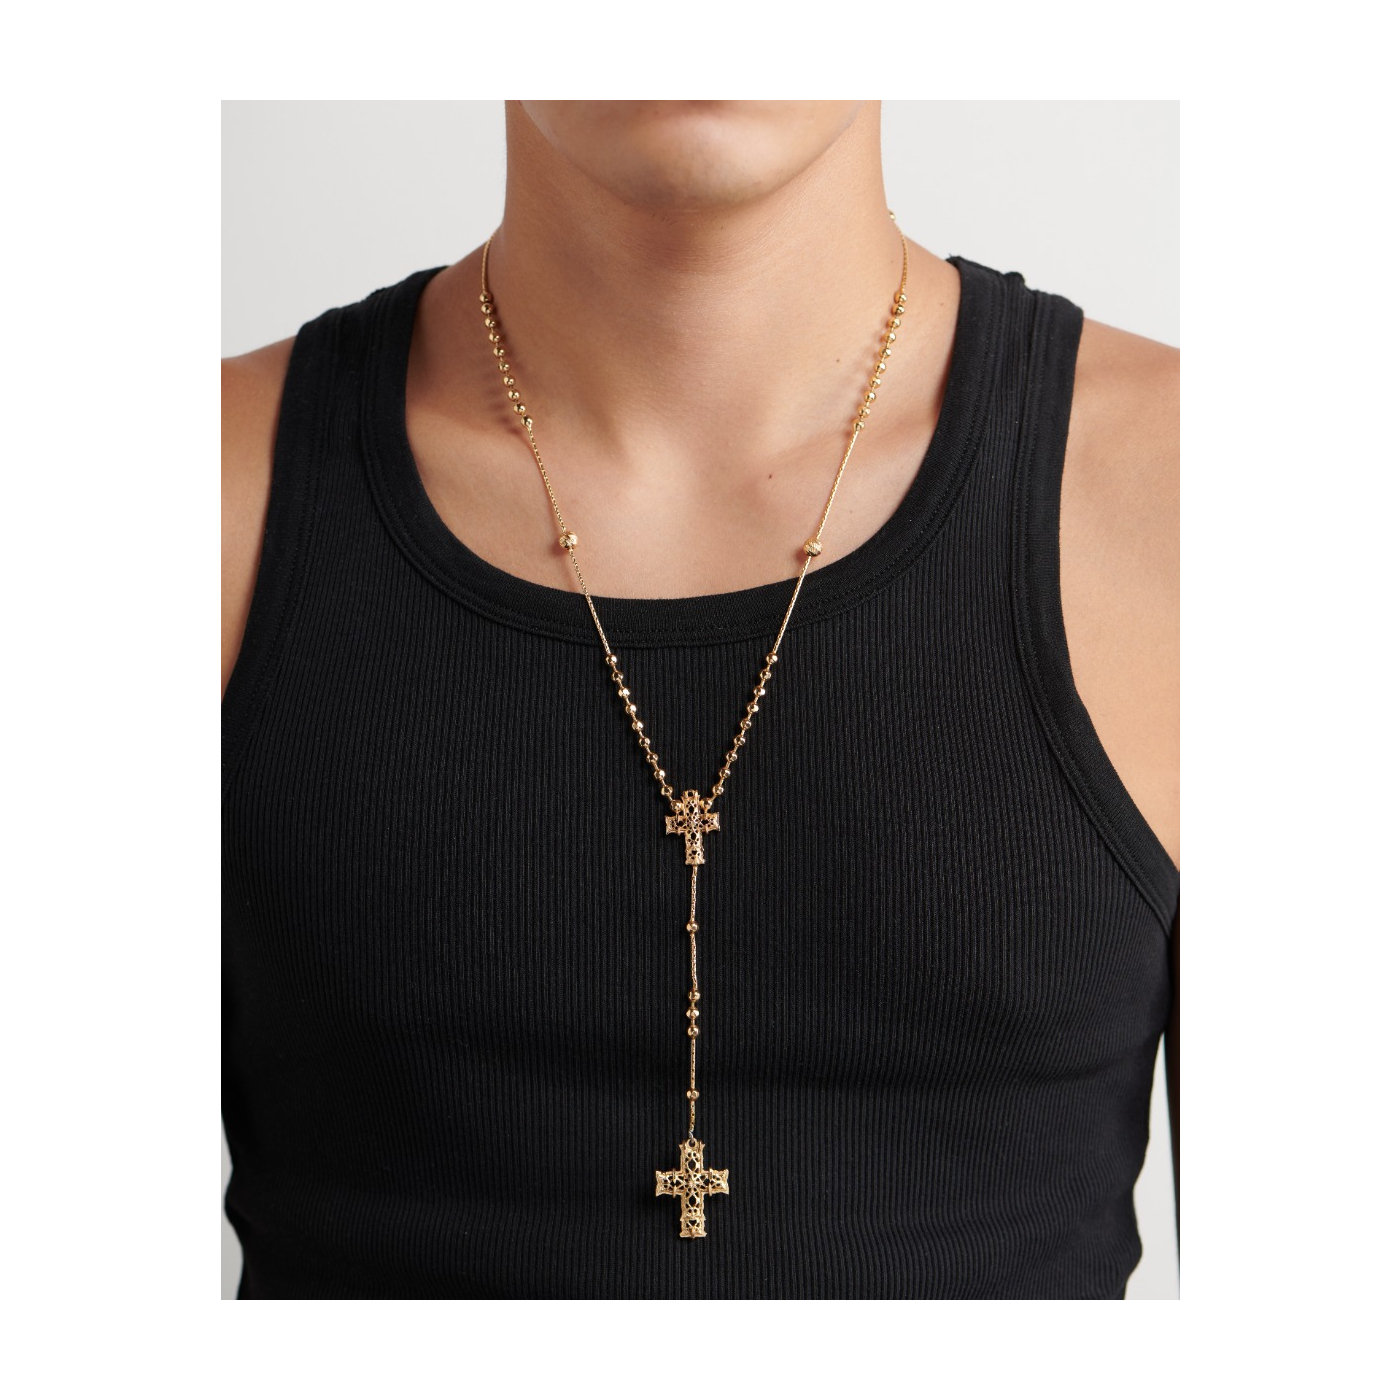 Marquis Jewelry - 18k gold rosary necklace,shipping... | Facebook